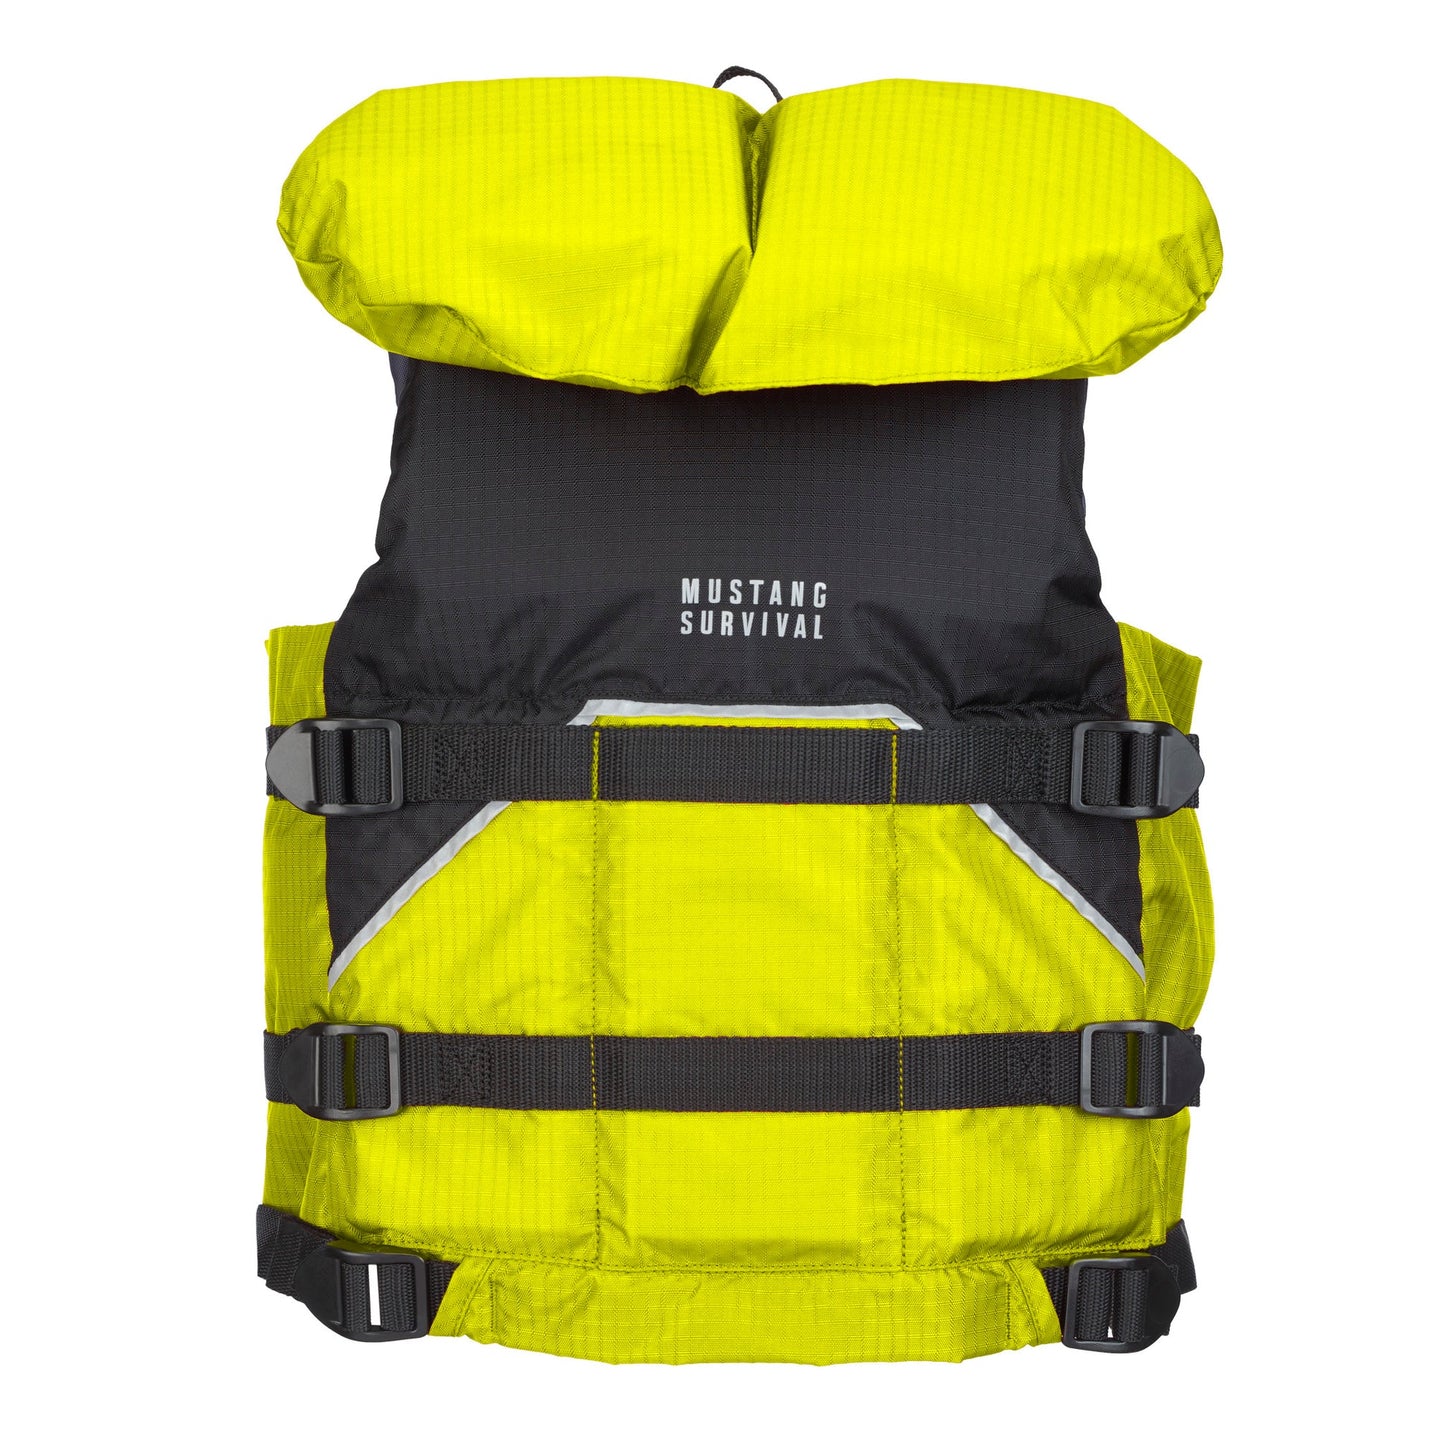 Mustang Youth Canyon V Foam Vest Yellow Black 50-90 LBS